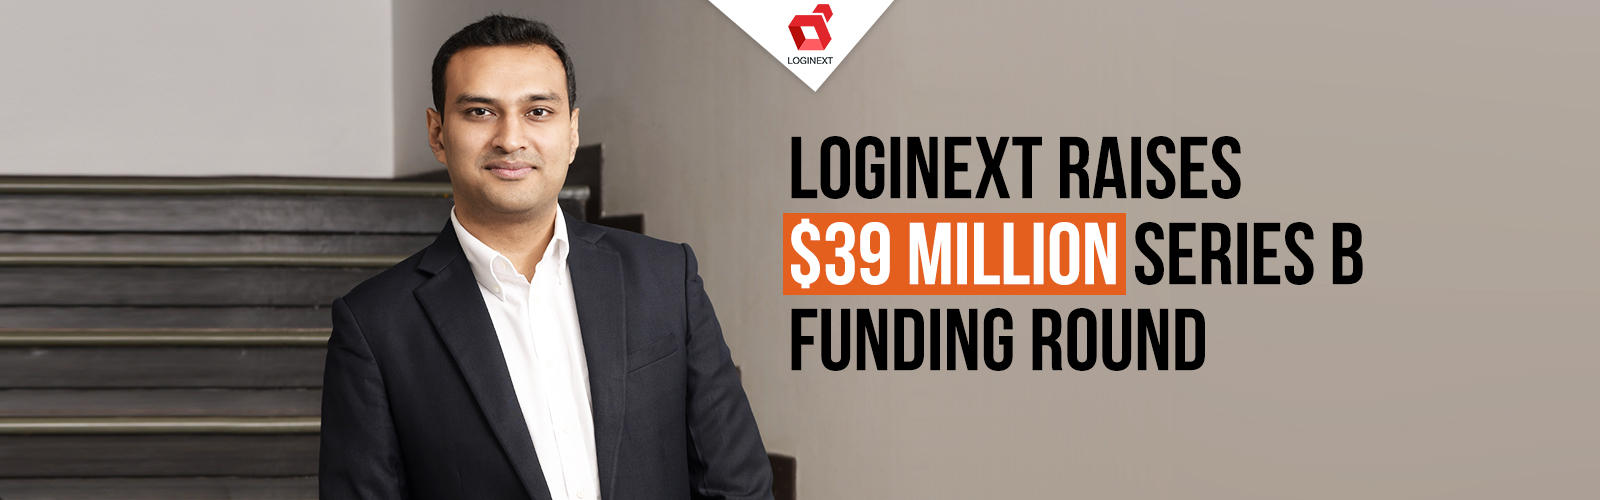 We’re all geared up to automate the logistics industry with a fresh $39 million series B round!